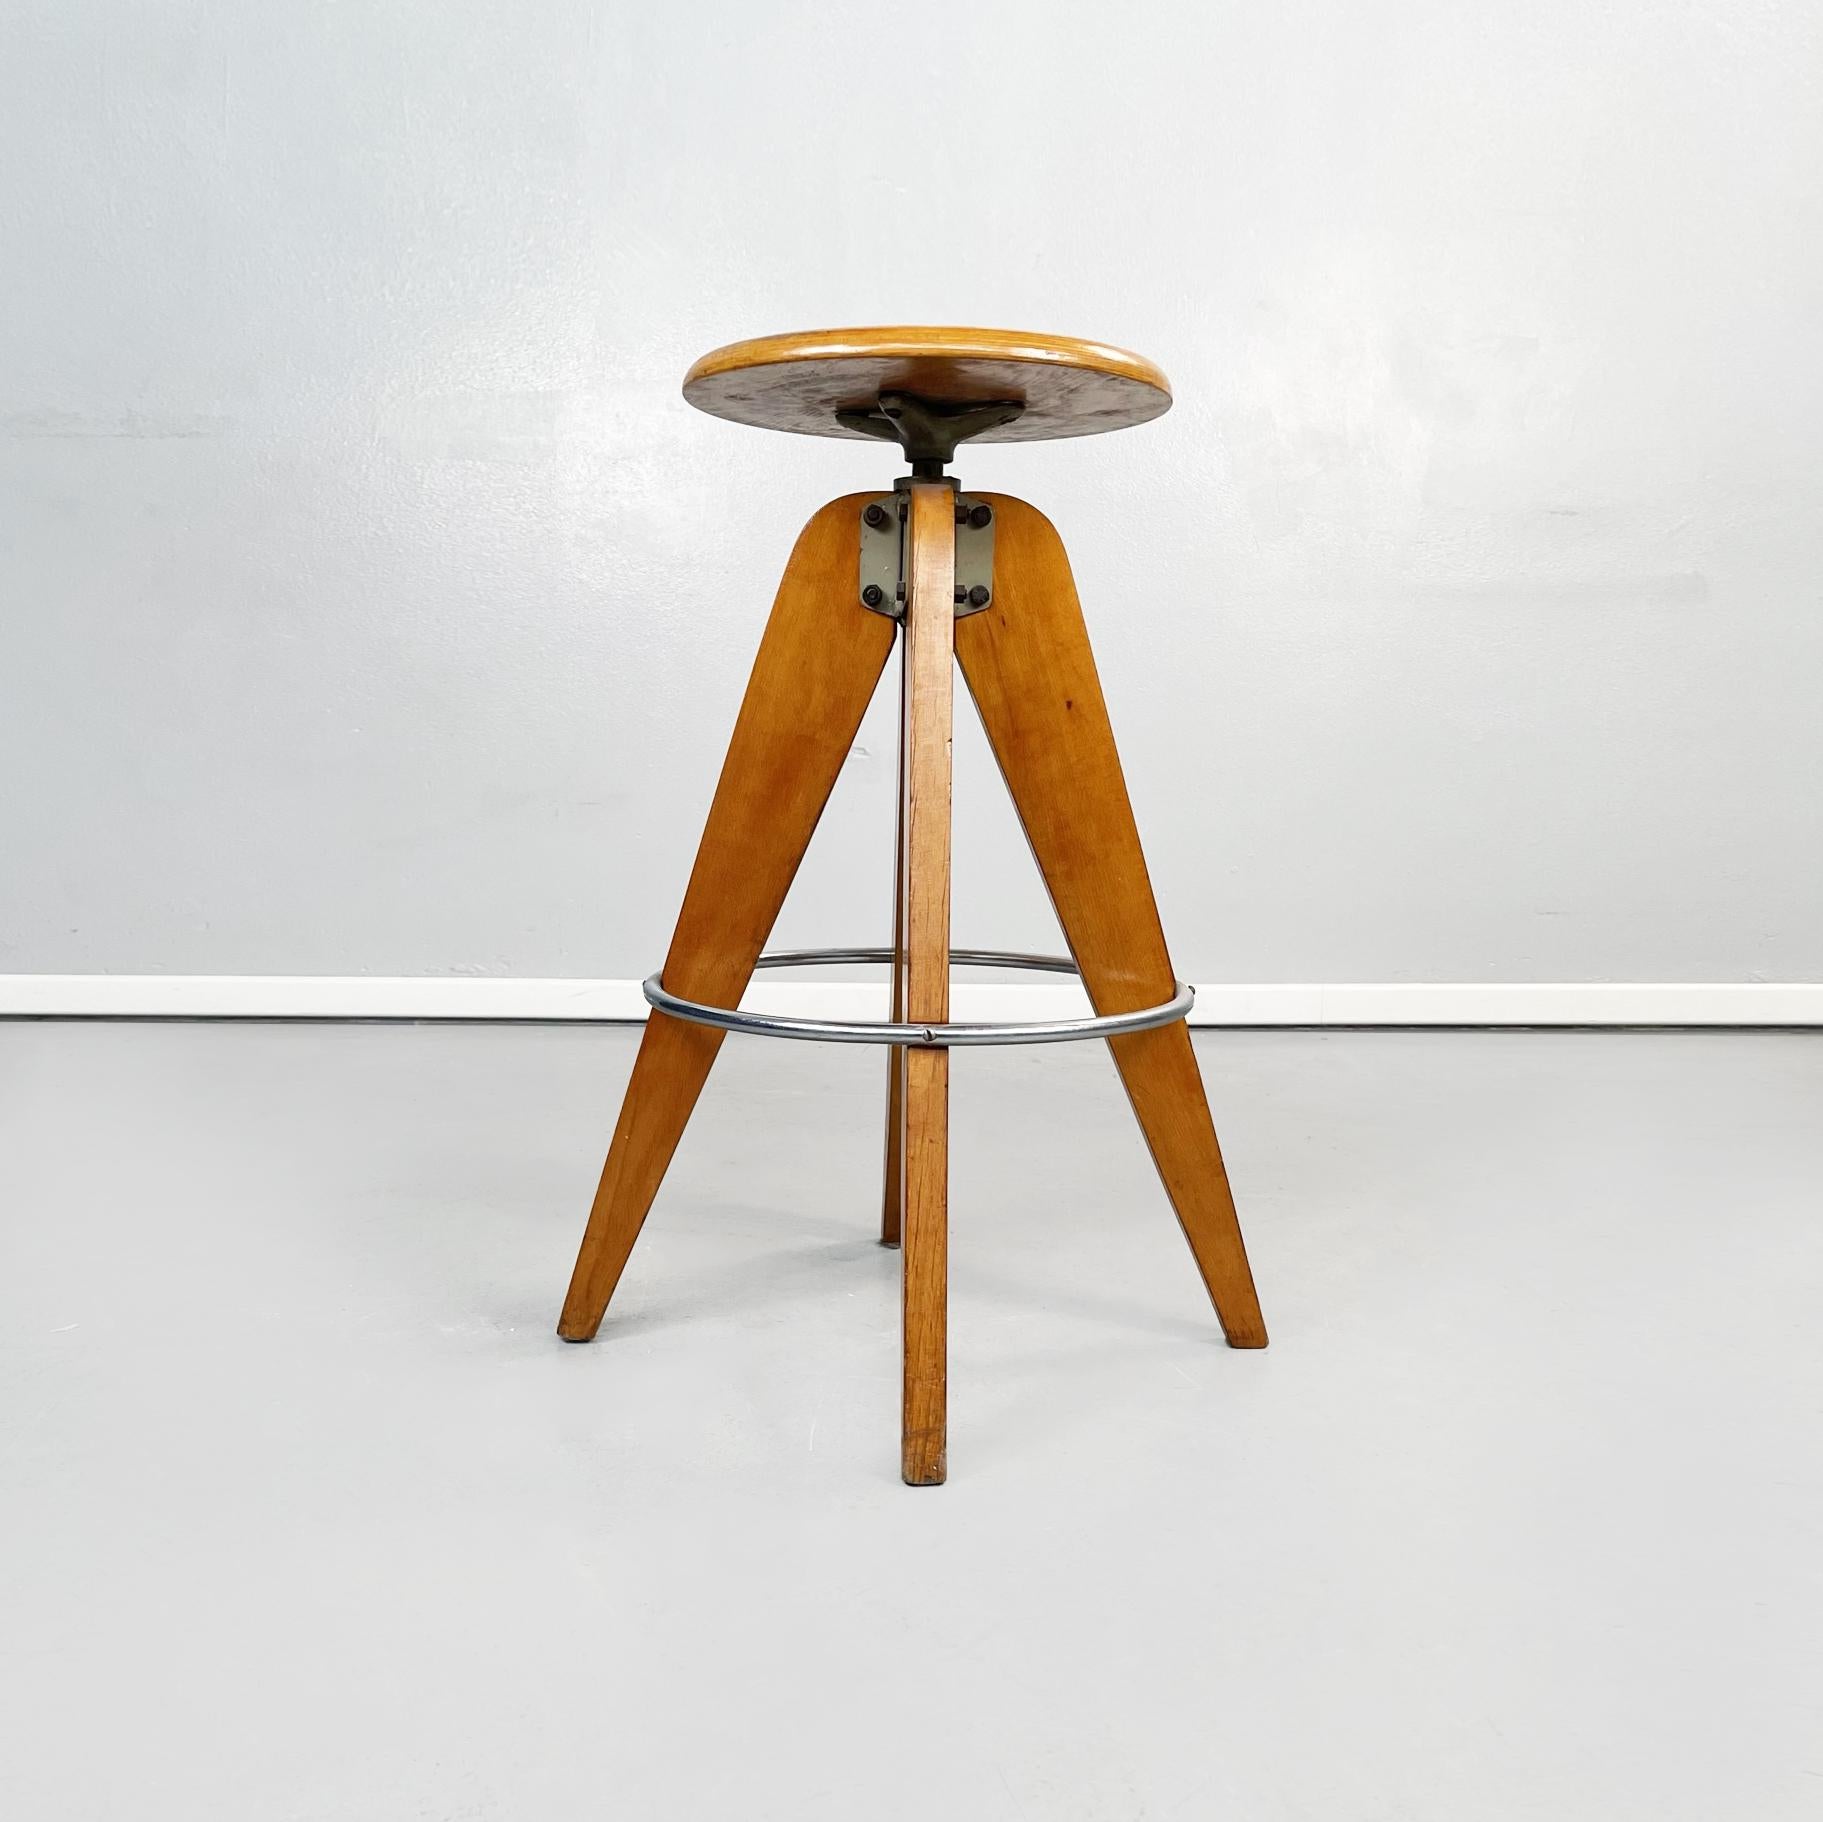 Italian post-modern High round stool in solid wood and metal, 1950s
The round stool in wood seat is adjustable and you can use it for a consolle bar or a snack table or for work.
It has 4 square legs connected by a metal circle can support the foot